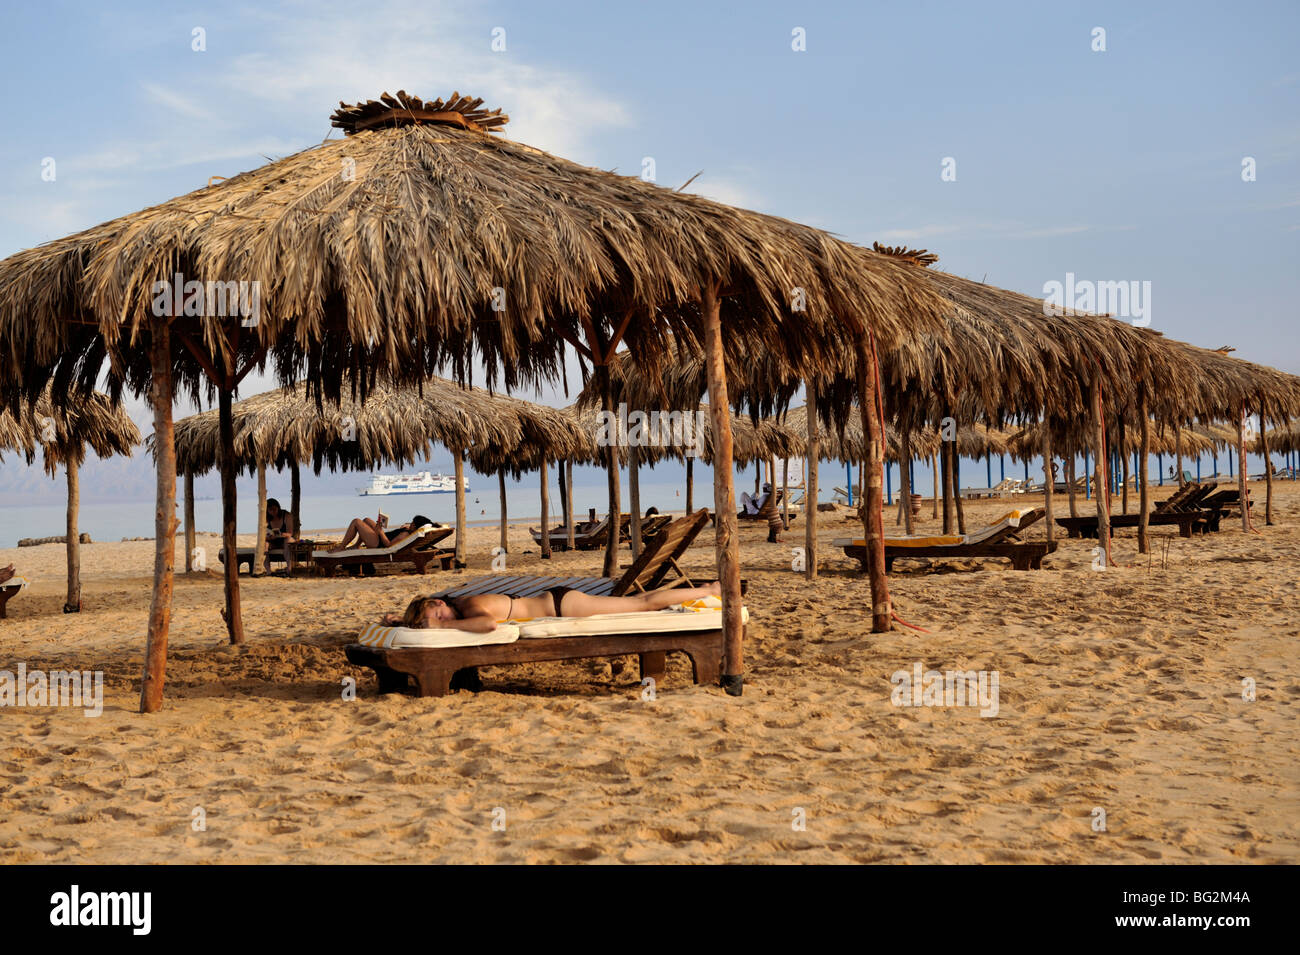 Sunbathing on tropical beach with thatched sunshades, Nuweiba, 'Red Sea', Sinai, Egypt Stock Photo